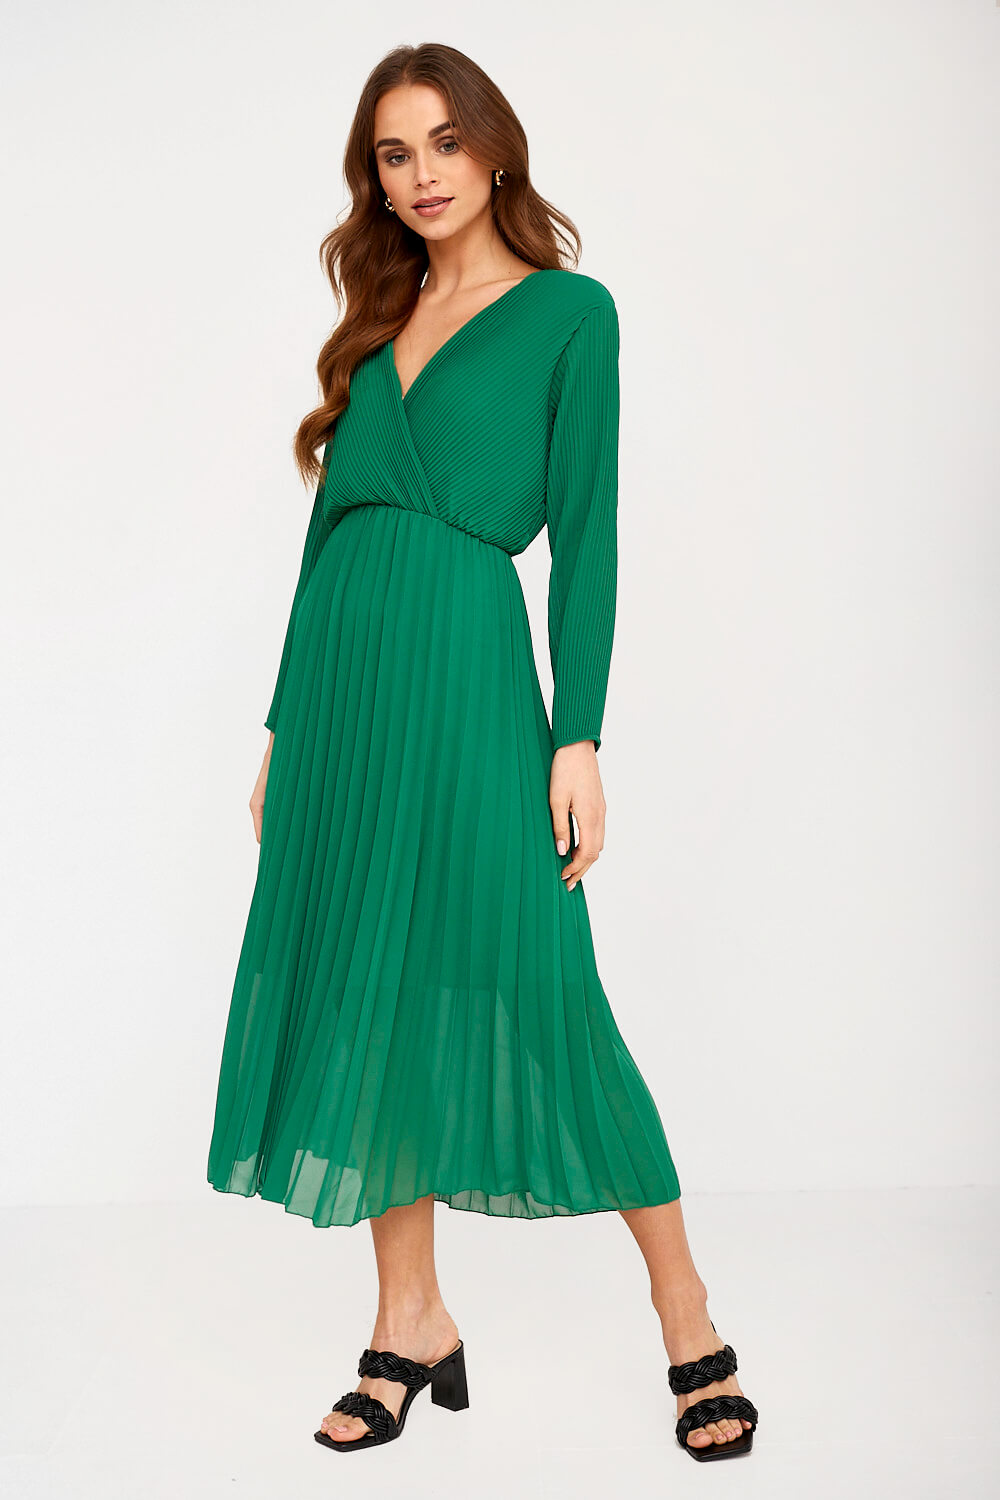 Pixie Daisy Mila Pleated Wrap Dress in Green | iCLOTHING - iCLOTHING